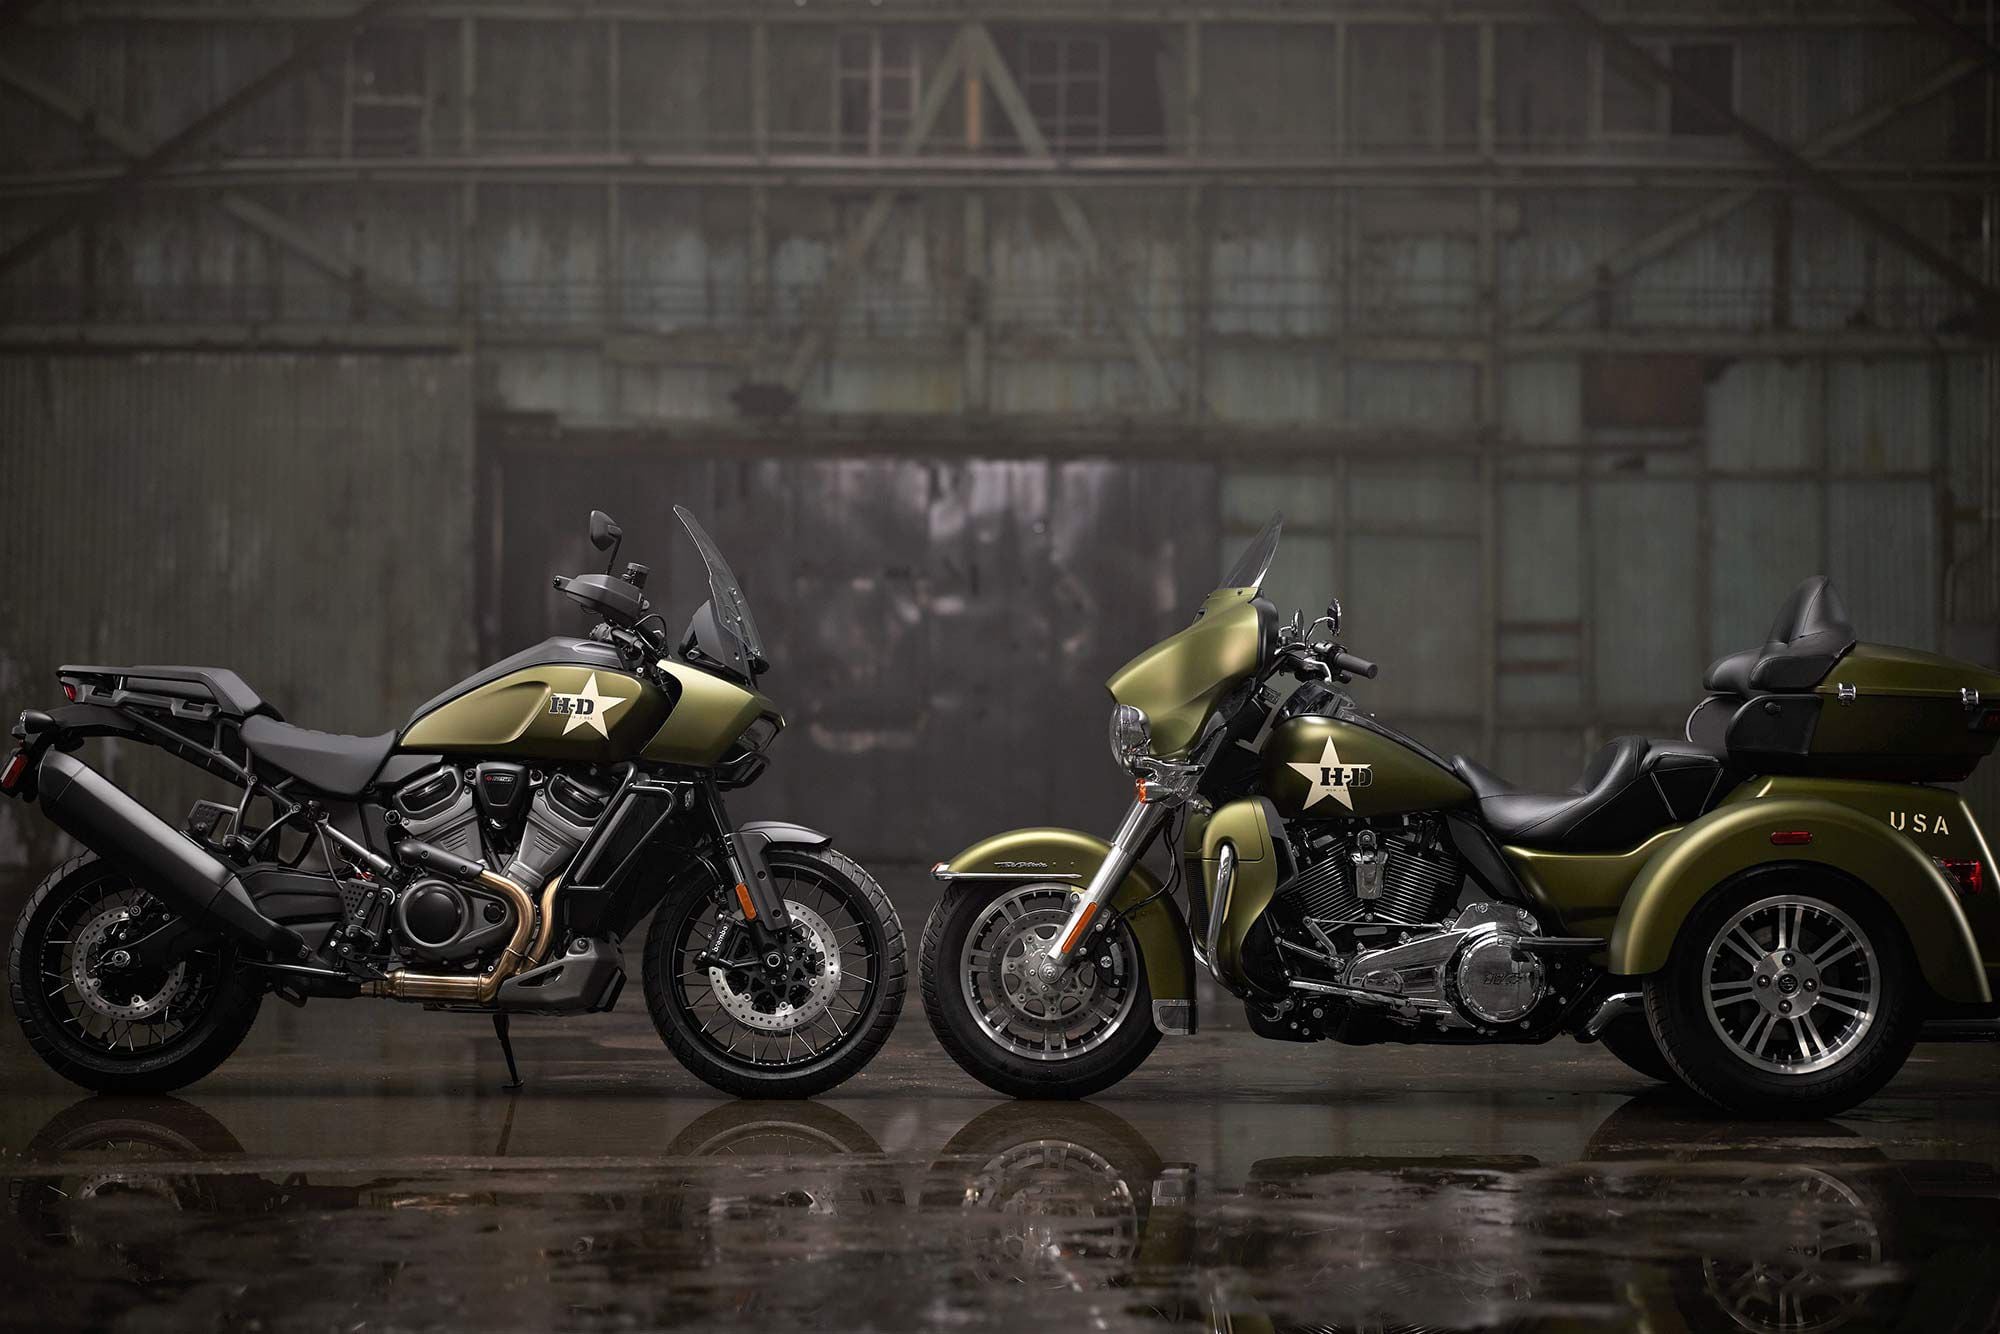 Harley-Davidson launches its 2022 G.I. Enthusiast Collection with two military-look models, the Pan America 1250 Special G.I. and the Tri Glide Ultra G.I., both meant to honor the members of H-D’s riding community who have or continue to serve in the US armed forces.